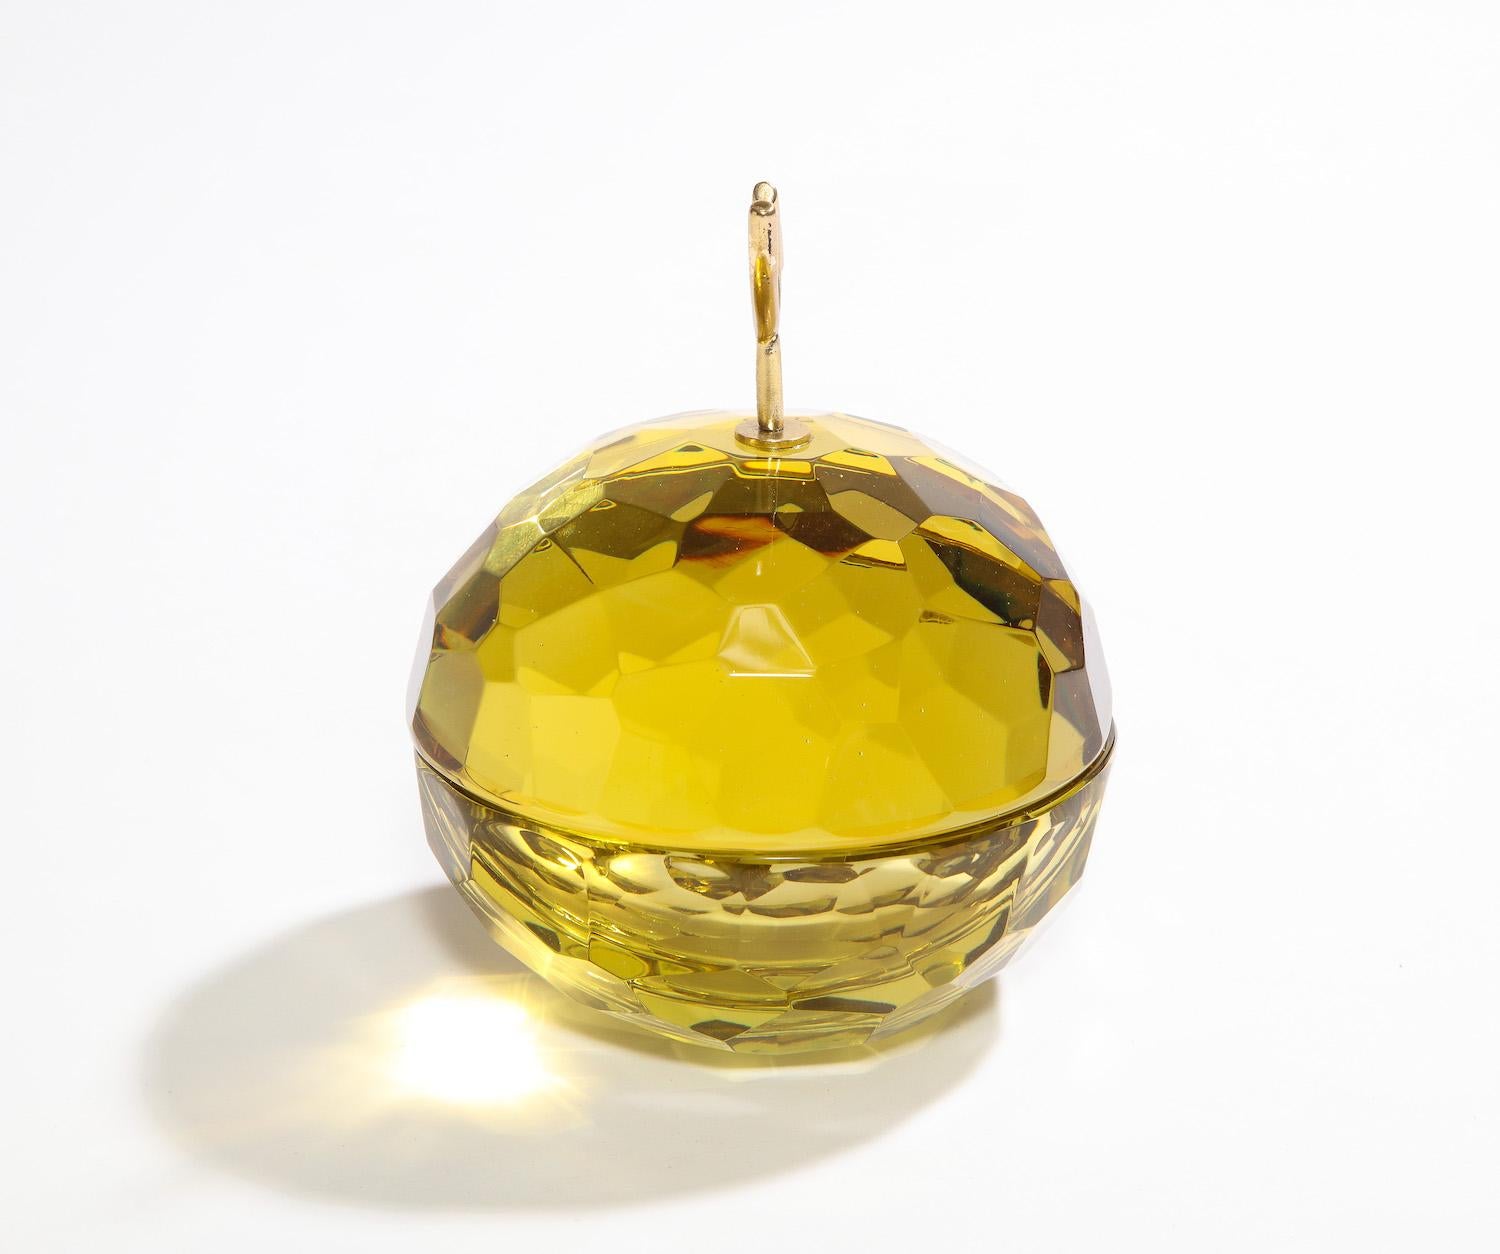 Covered bowl by Ghiró Studio. Studio-made covered bowl of hand carved glass. Brilliant-yellow colored glass featuring faceted exterior and all polished edges. Cast-brass handle and artist signed underneath.